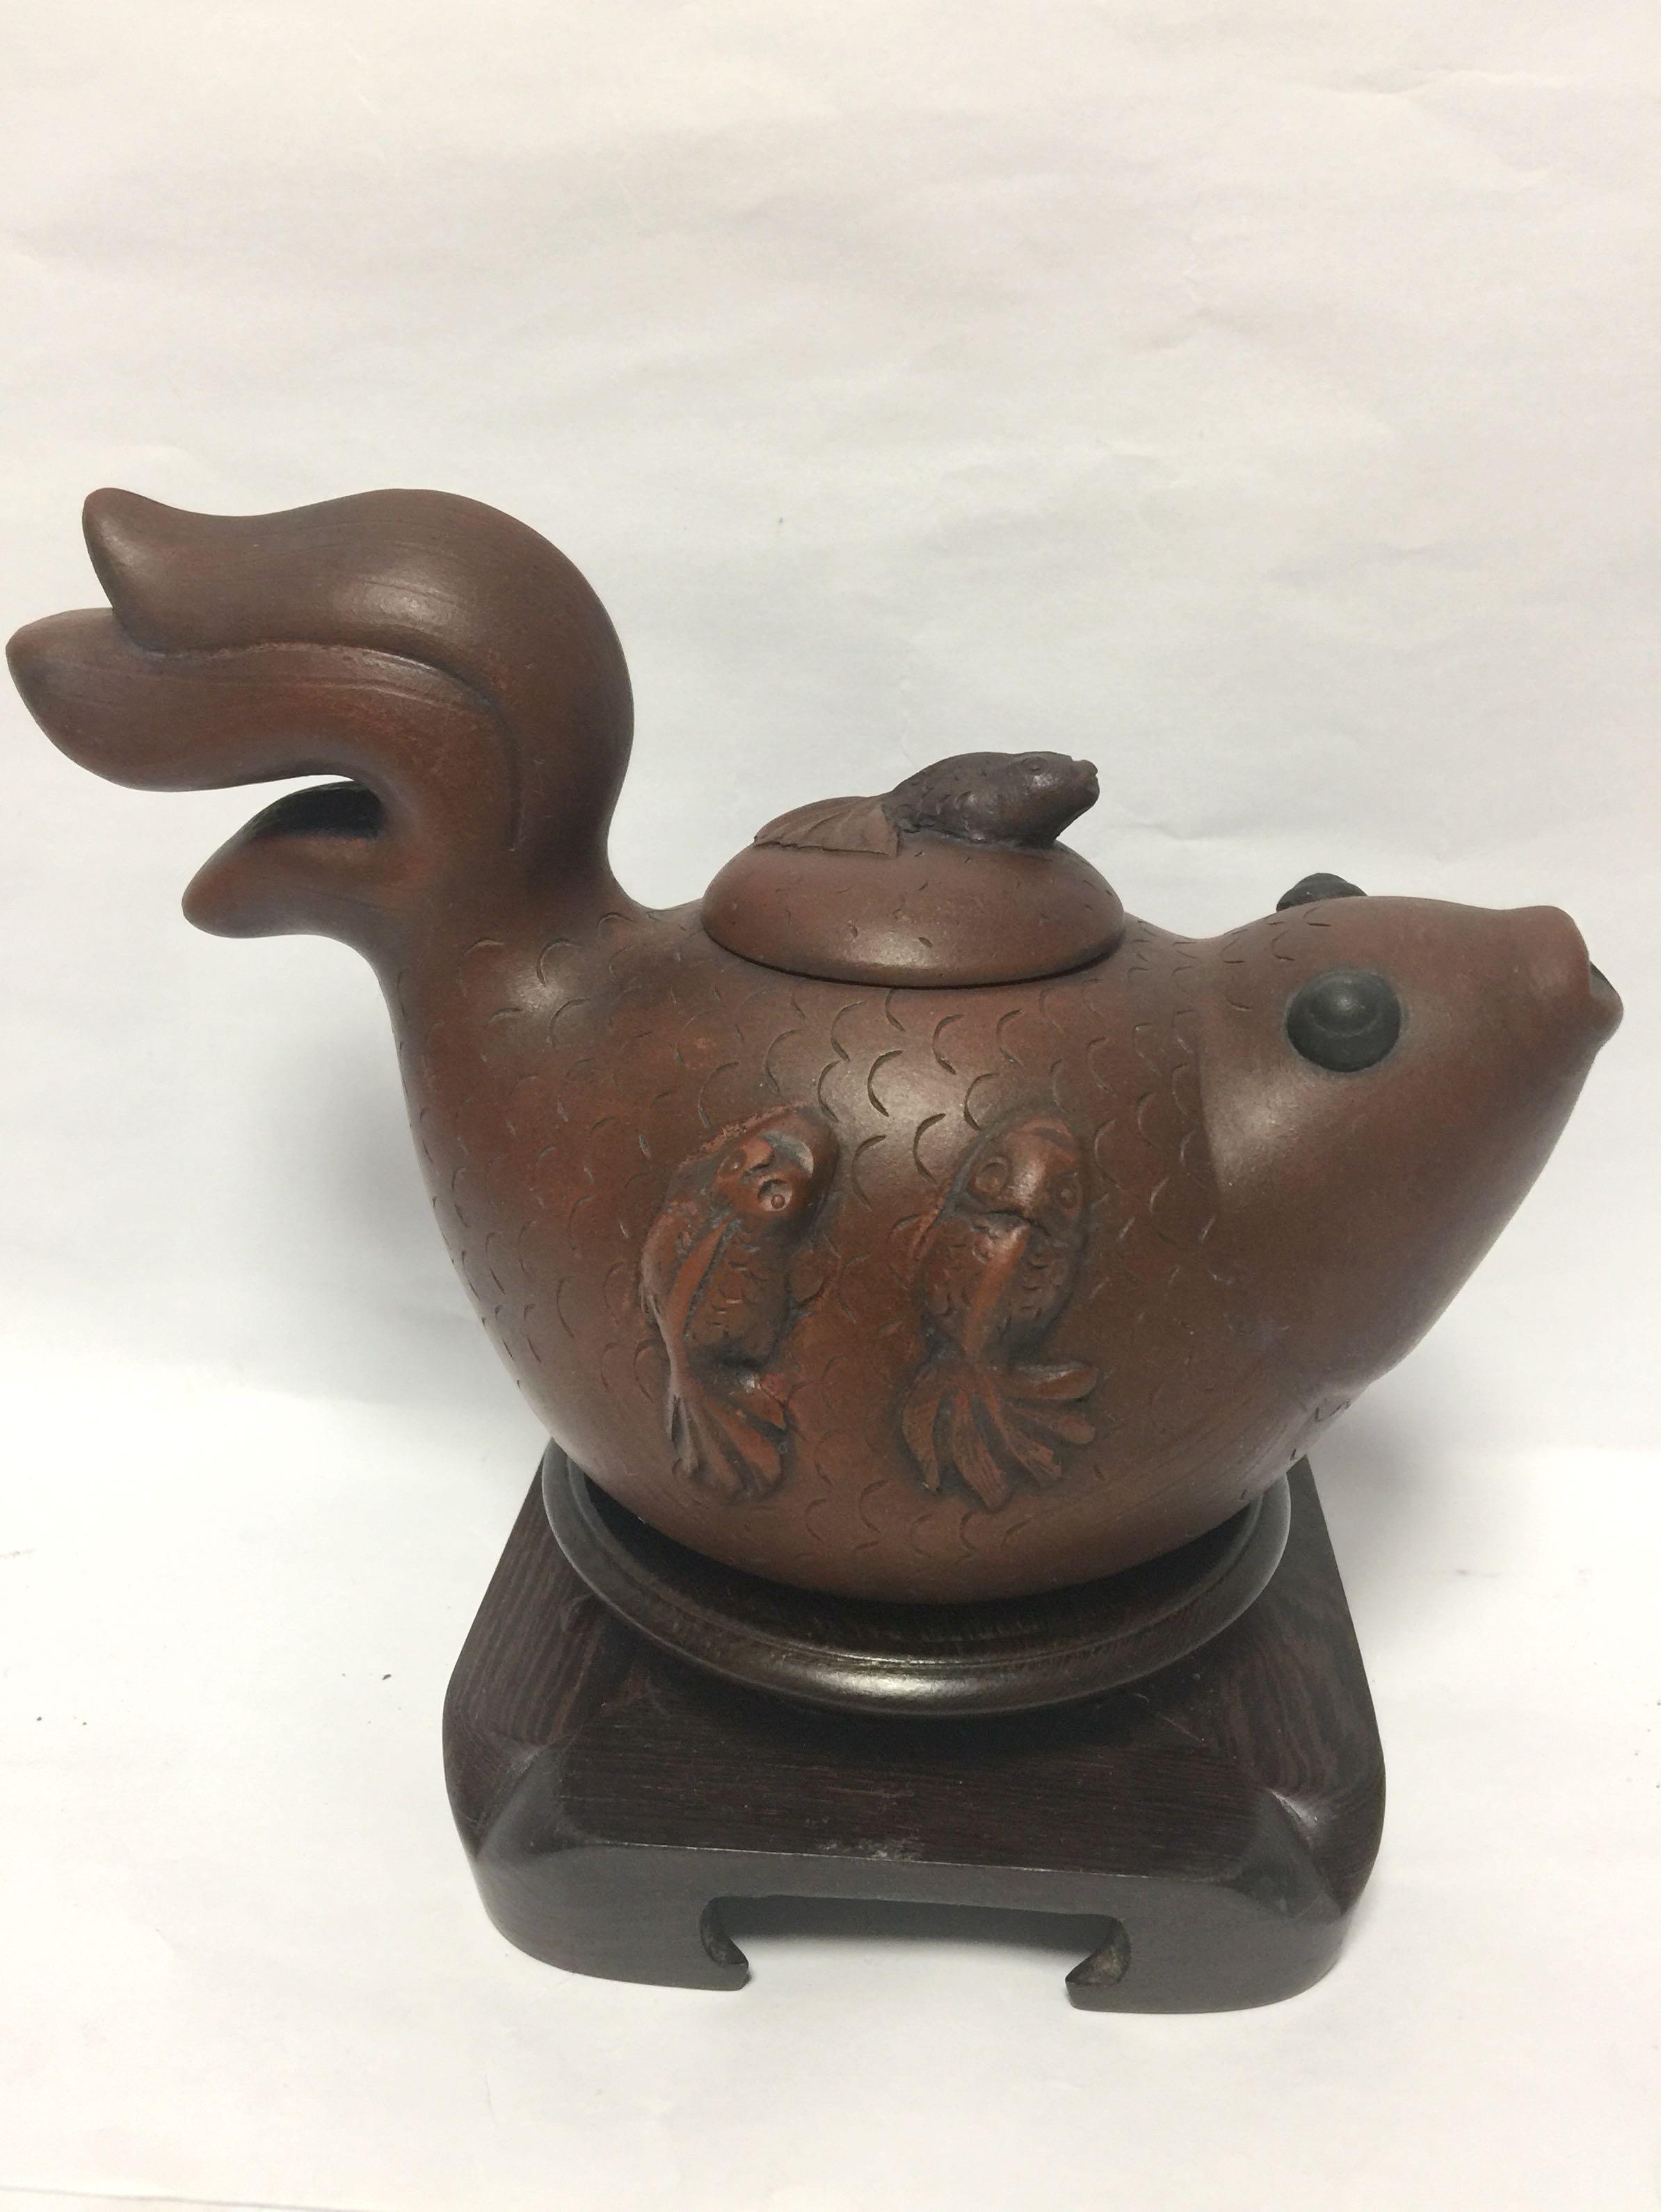 An Old Chinese Handmade Yixing Zisha Teapot Carving Goldfish With Arching Tail And Lid 老旧中国宜兴紫砂壶雕刻着金鱼与其拱形尾巴及盖子 Hobbies Toys Memorabilia Collectibles Vintage Collectibles On Carousell